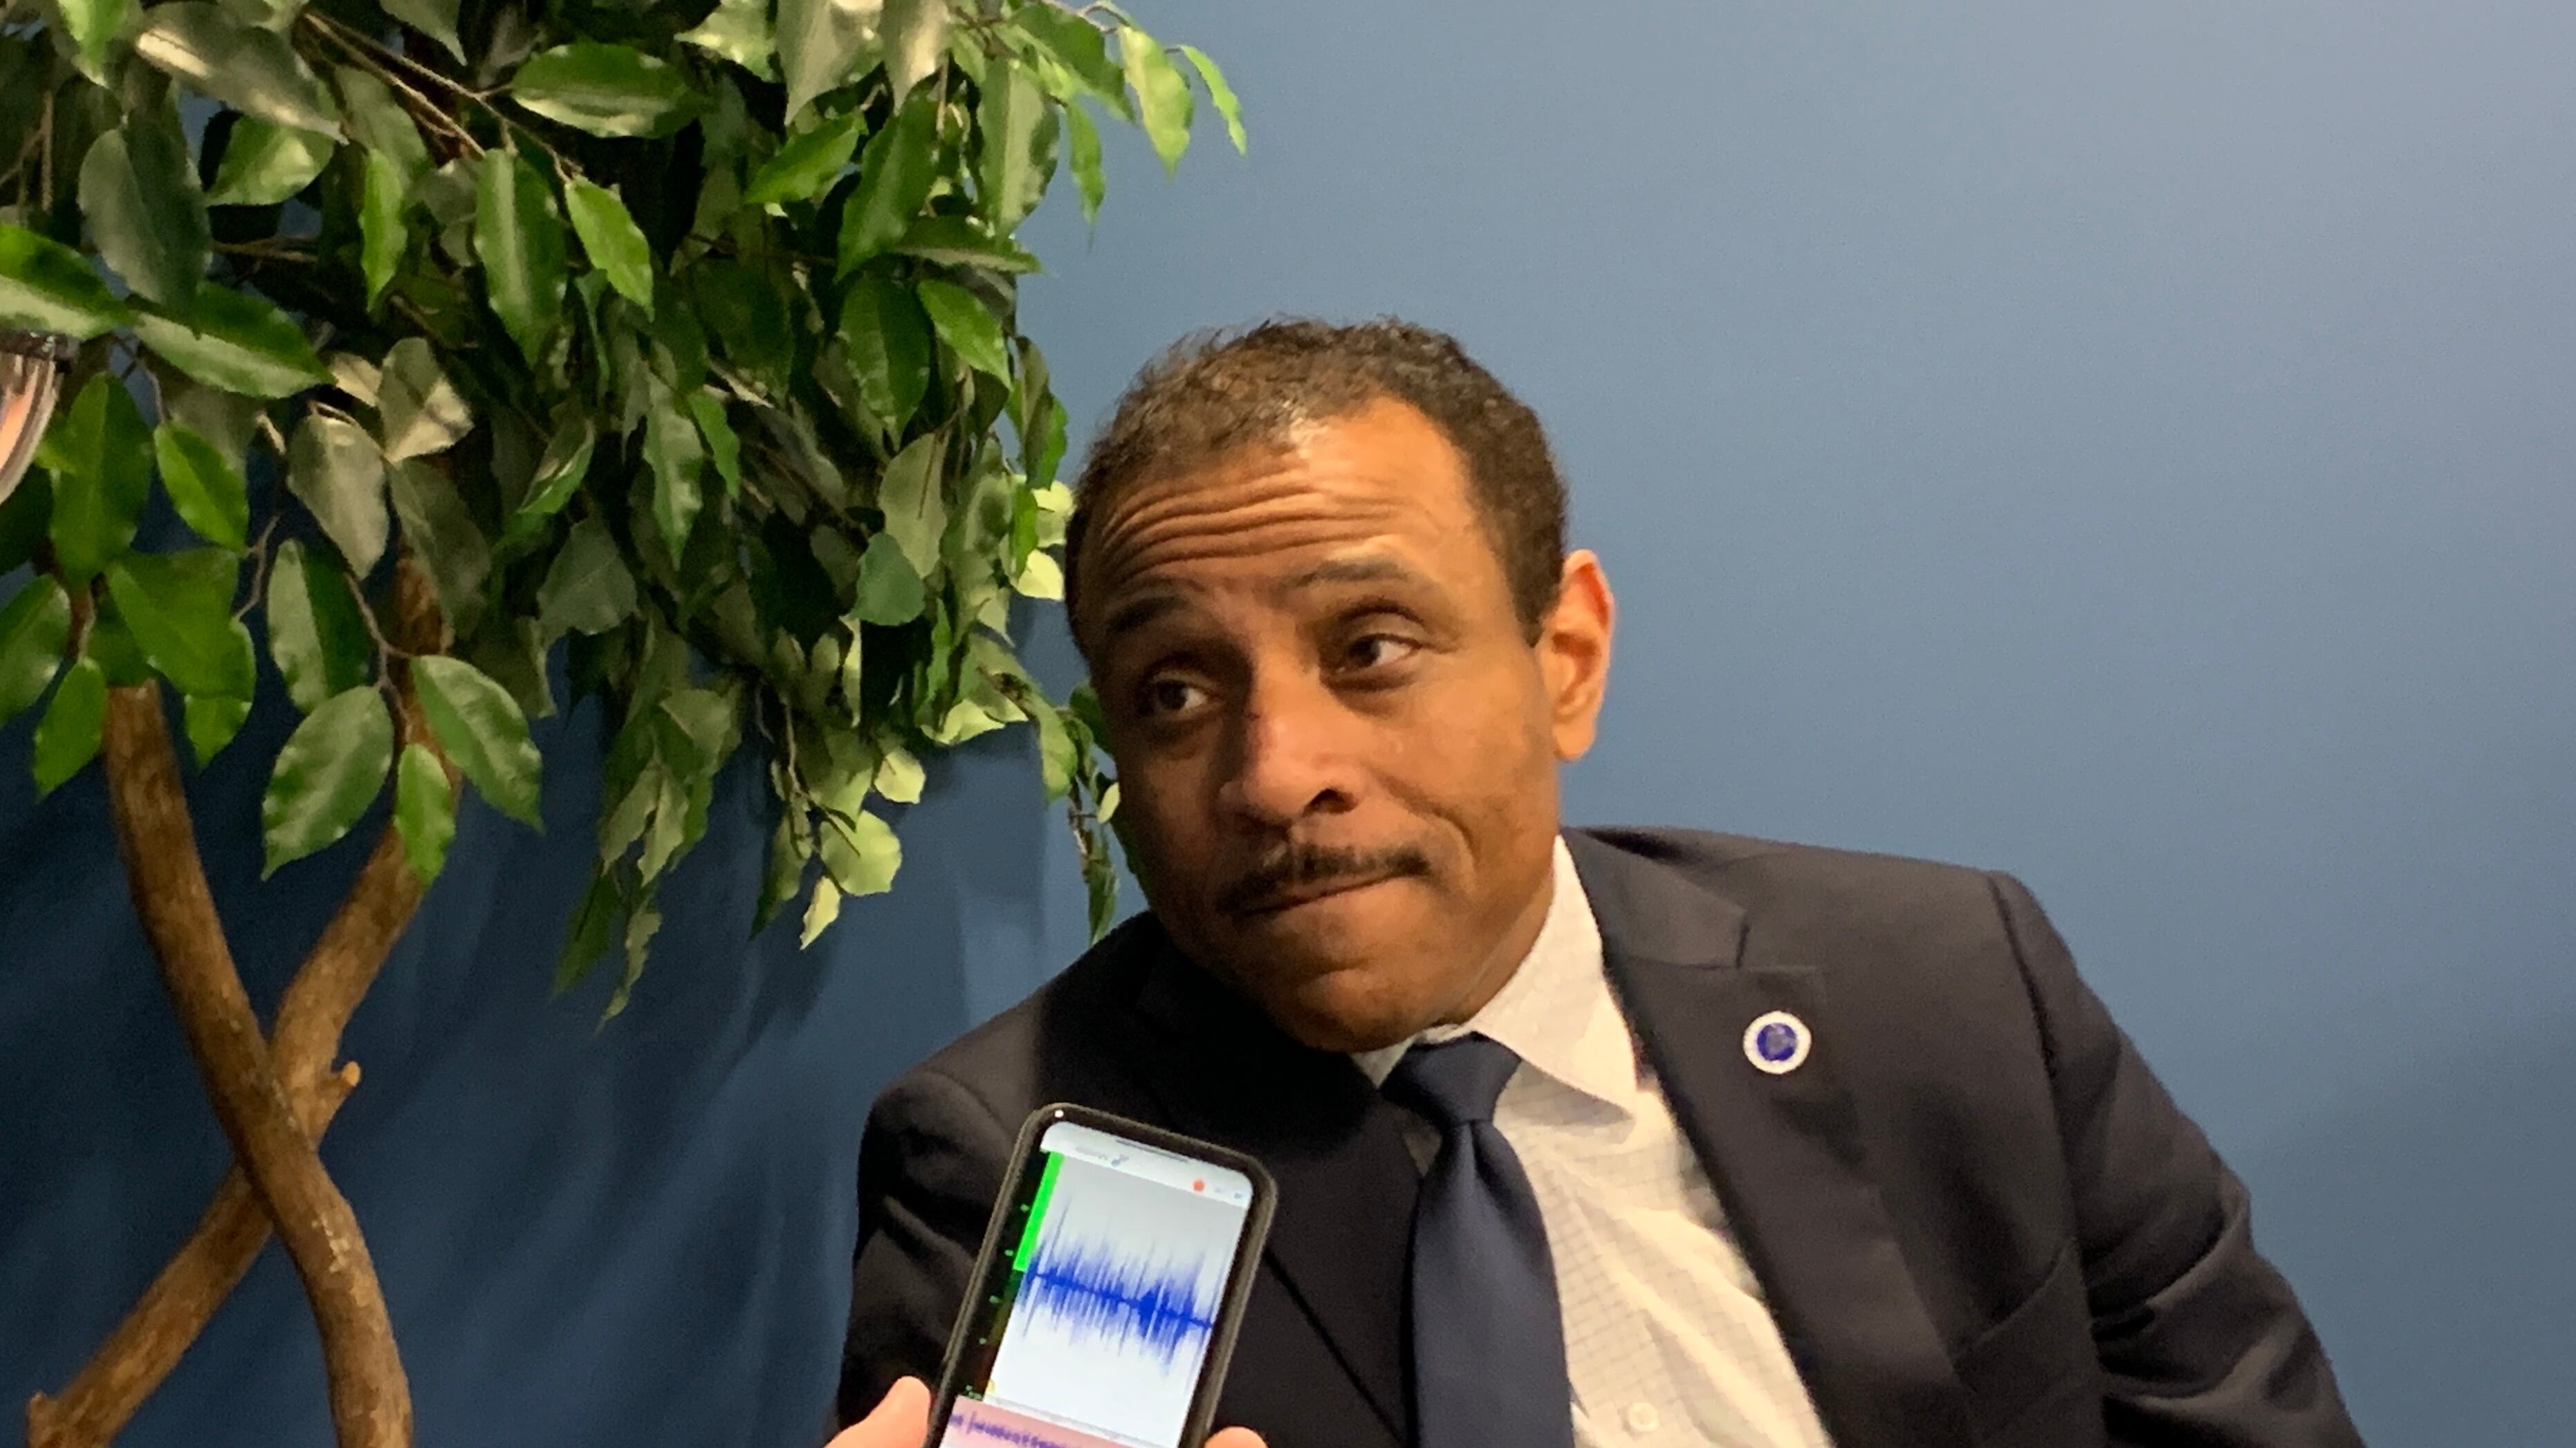 A man in a dark suit and white shirt leans to his right while a person holds a phone near his face in front of a plant a blue wall.